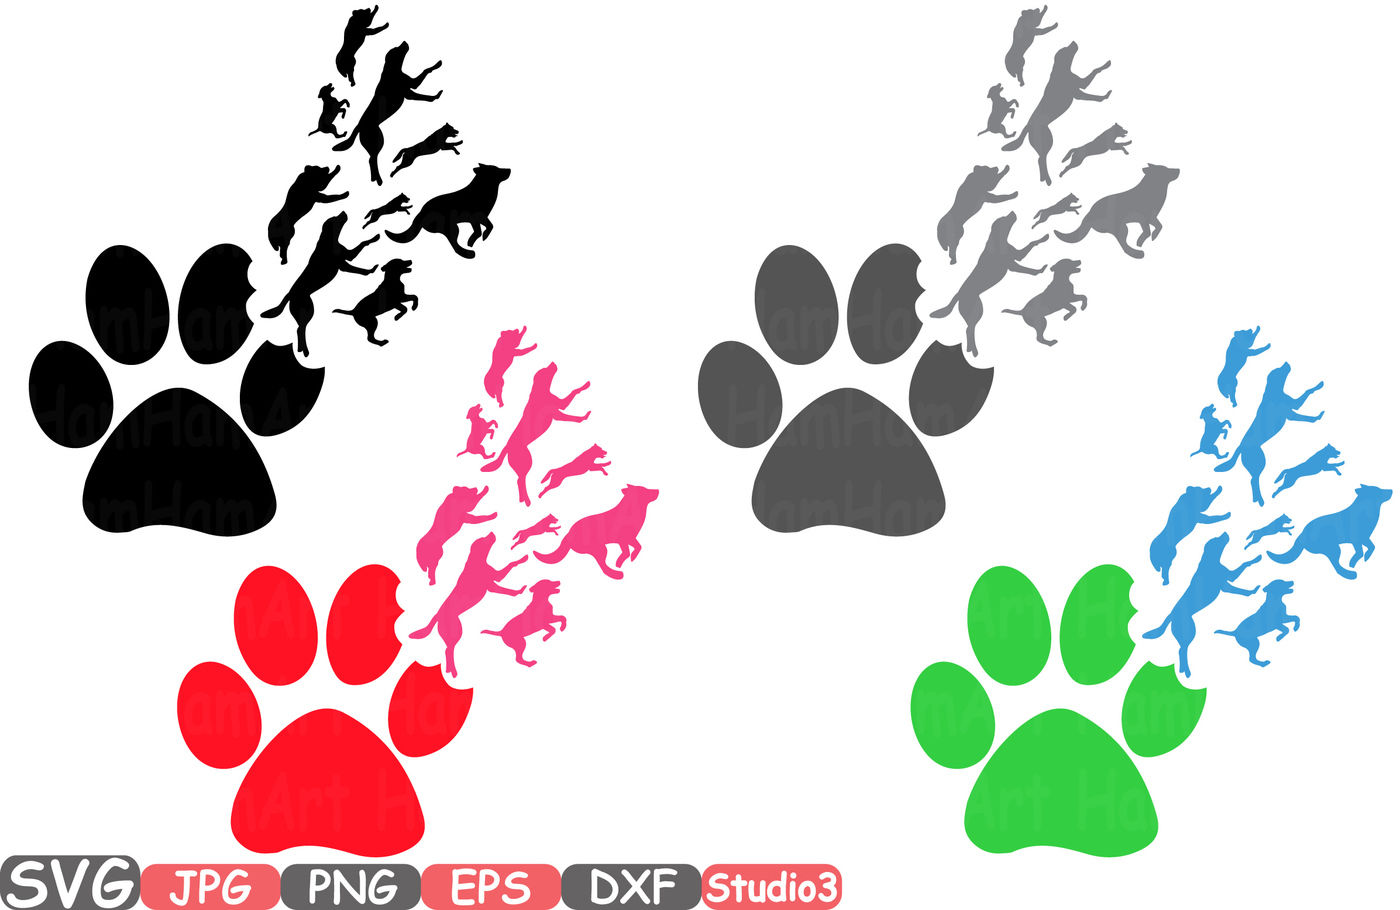 Puppy Silhouette Svg Cutting Files Pet Paw Dog Dogs Cute Animal 763s By Hamhamart Thehungryjpeg Com